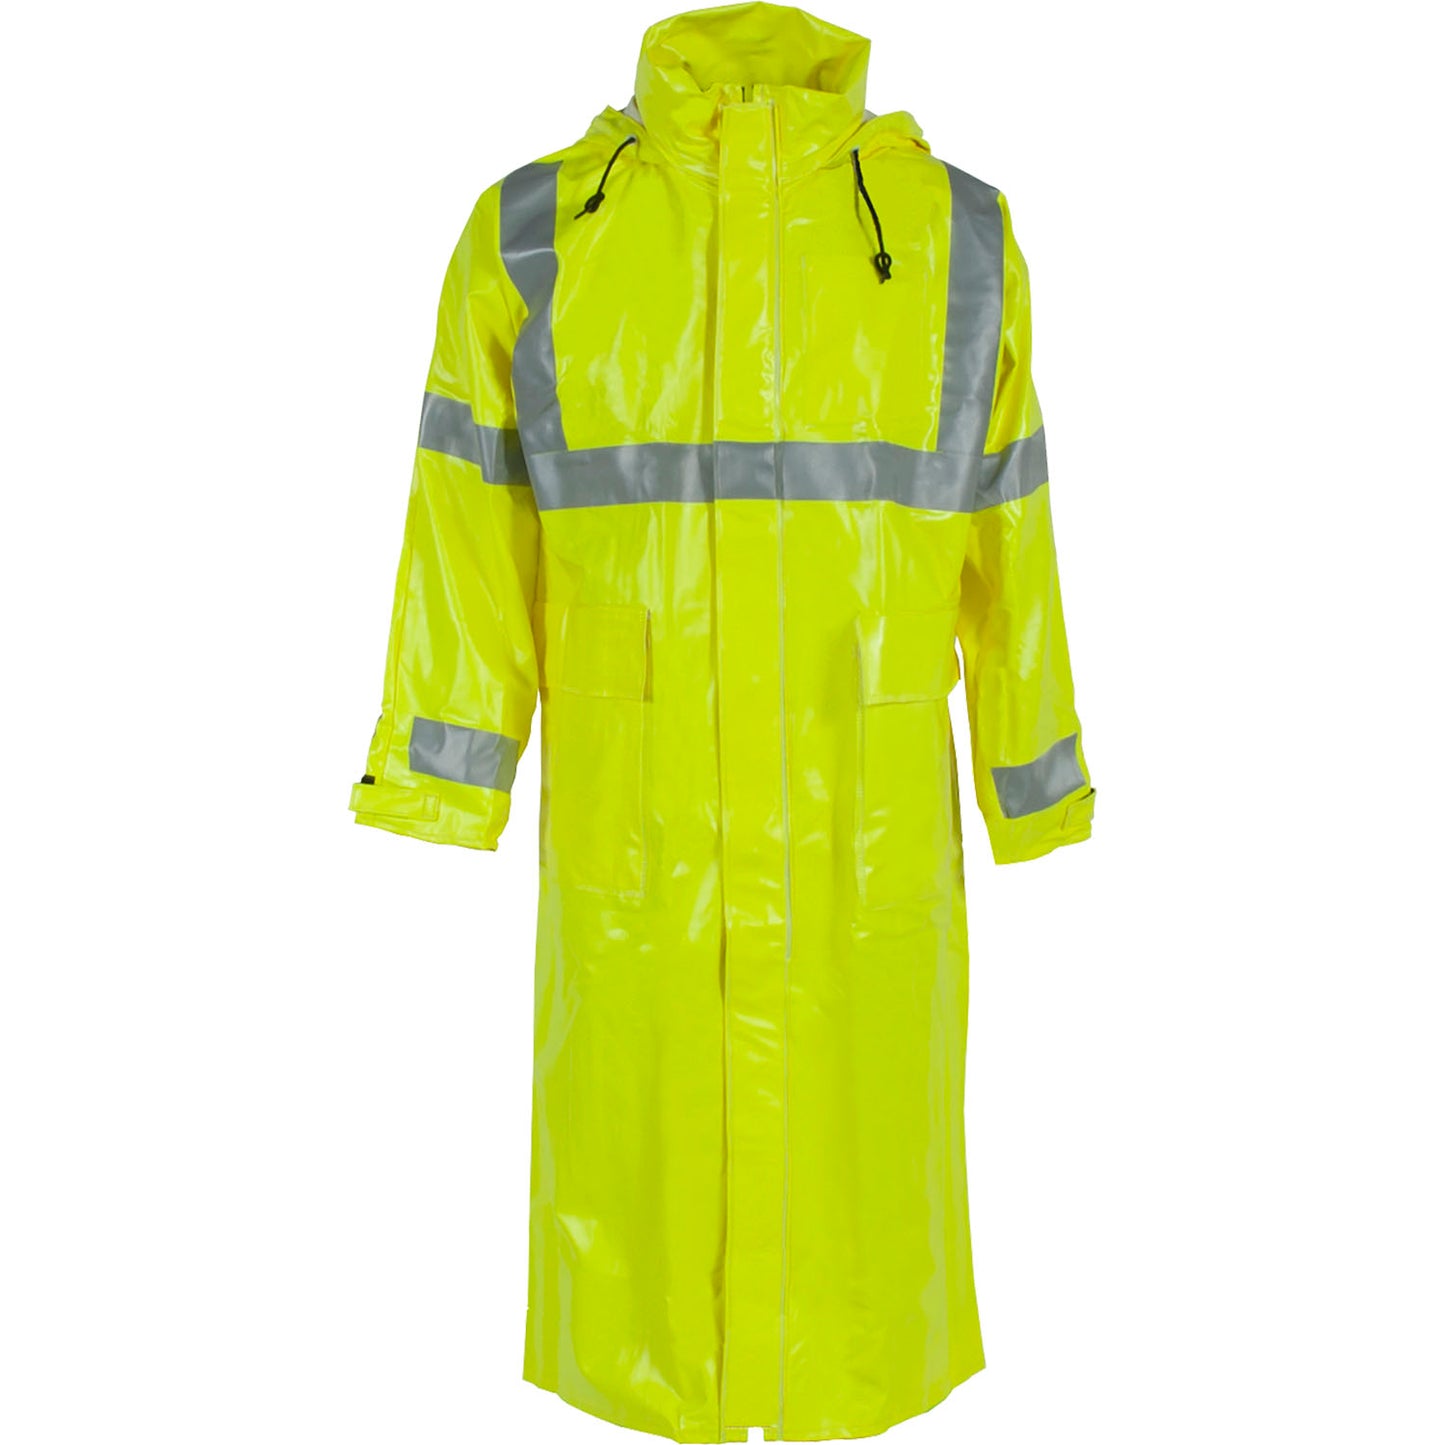 Neese Dura ARC II Series Coat with Attached Hood